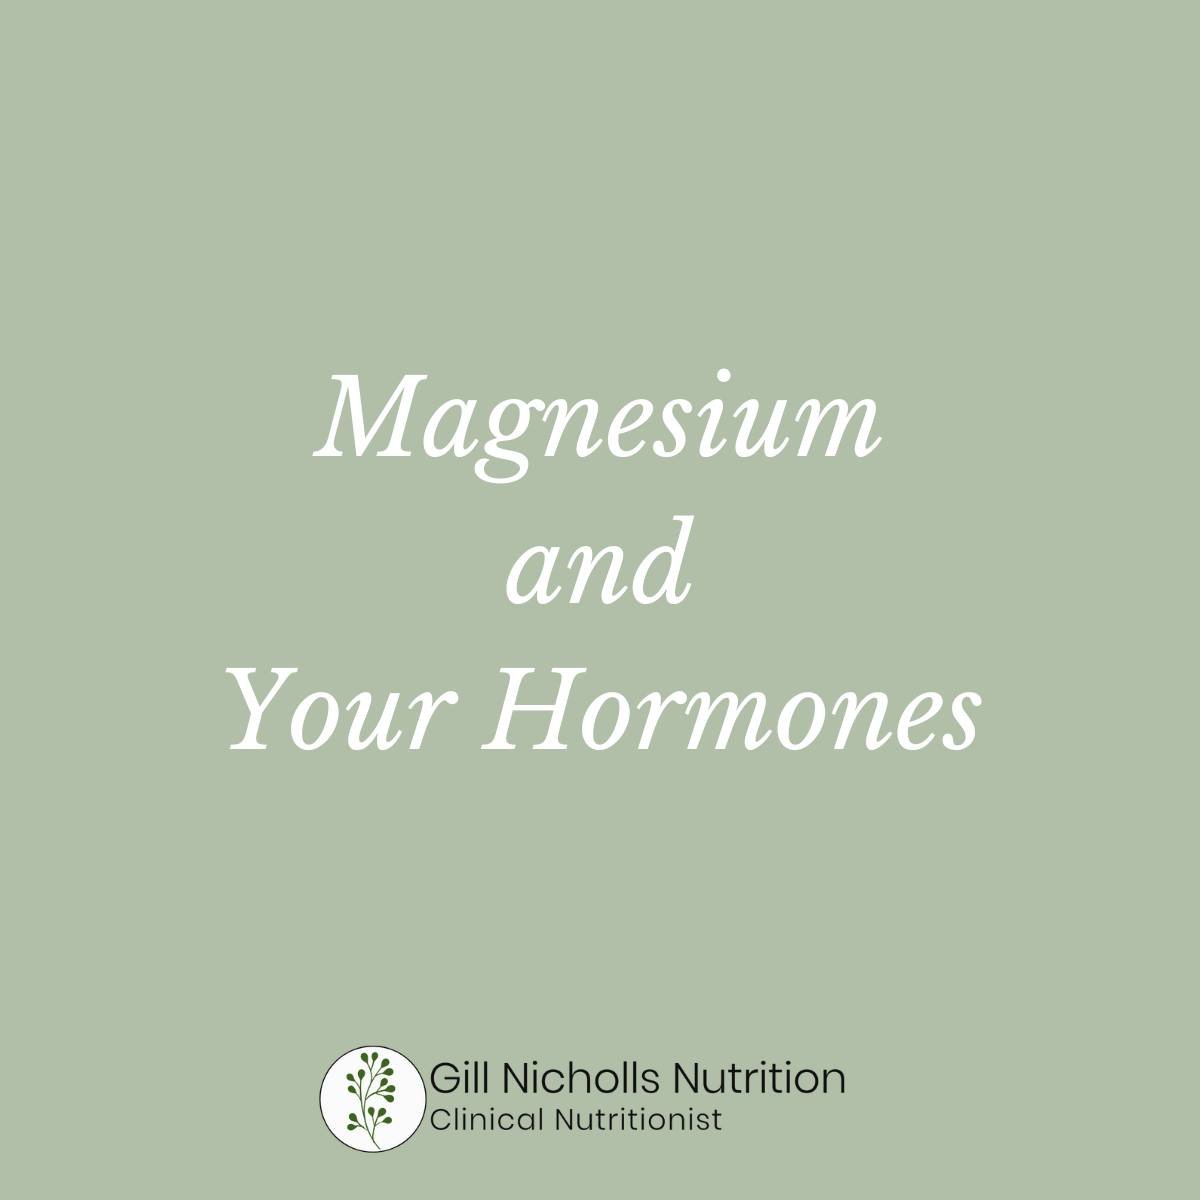 Hey everyone! Let's talk about a crucial mineral that's often overlooked: magnesium!

Did you know that magnesium plays a vital role in hormone balance and production?

Here are just a few ways magnesium impacts your hormones:

- Regulates cortisol l